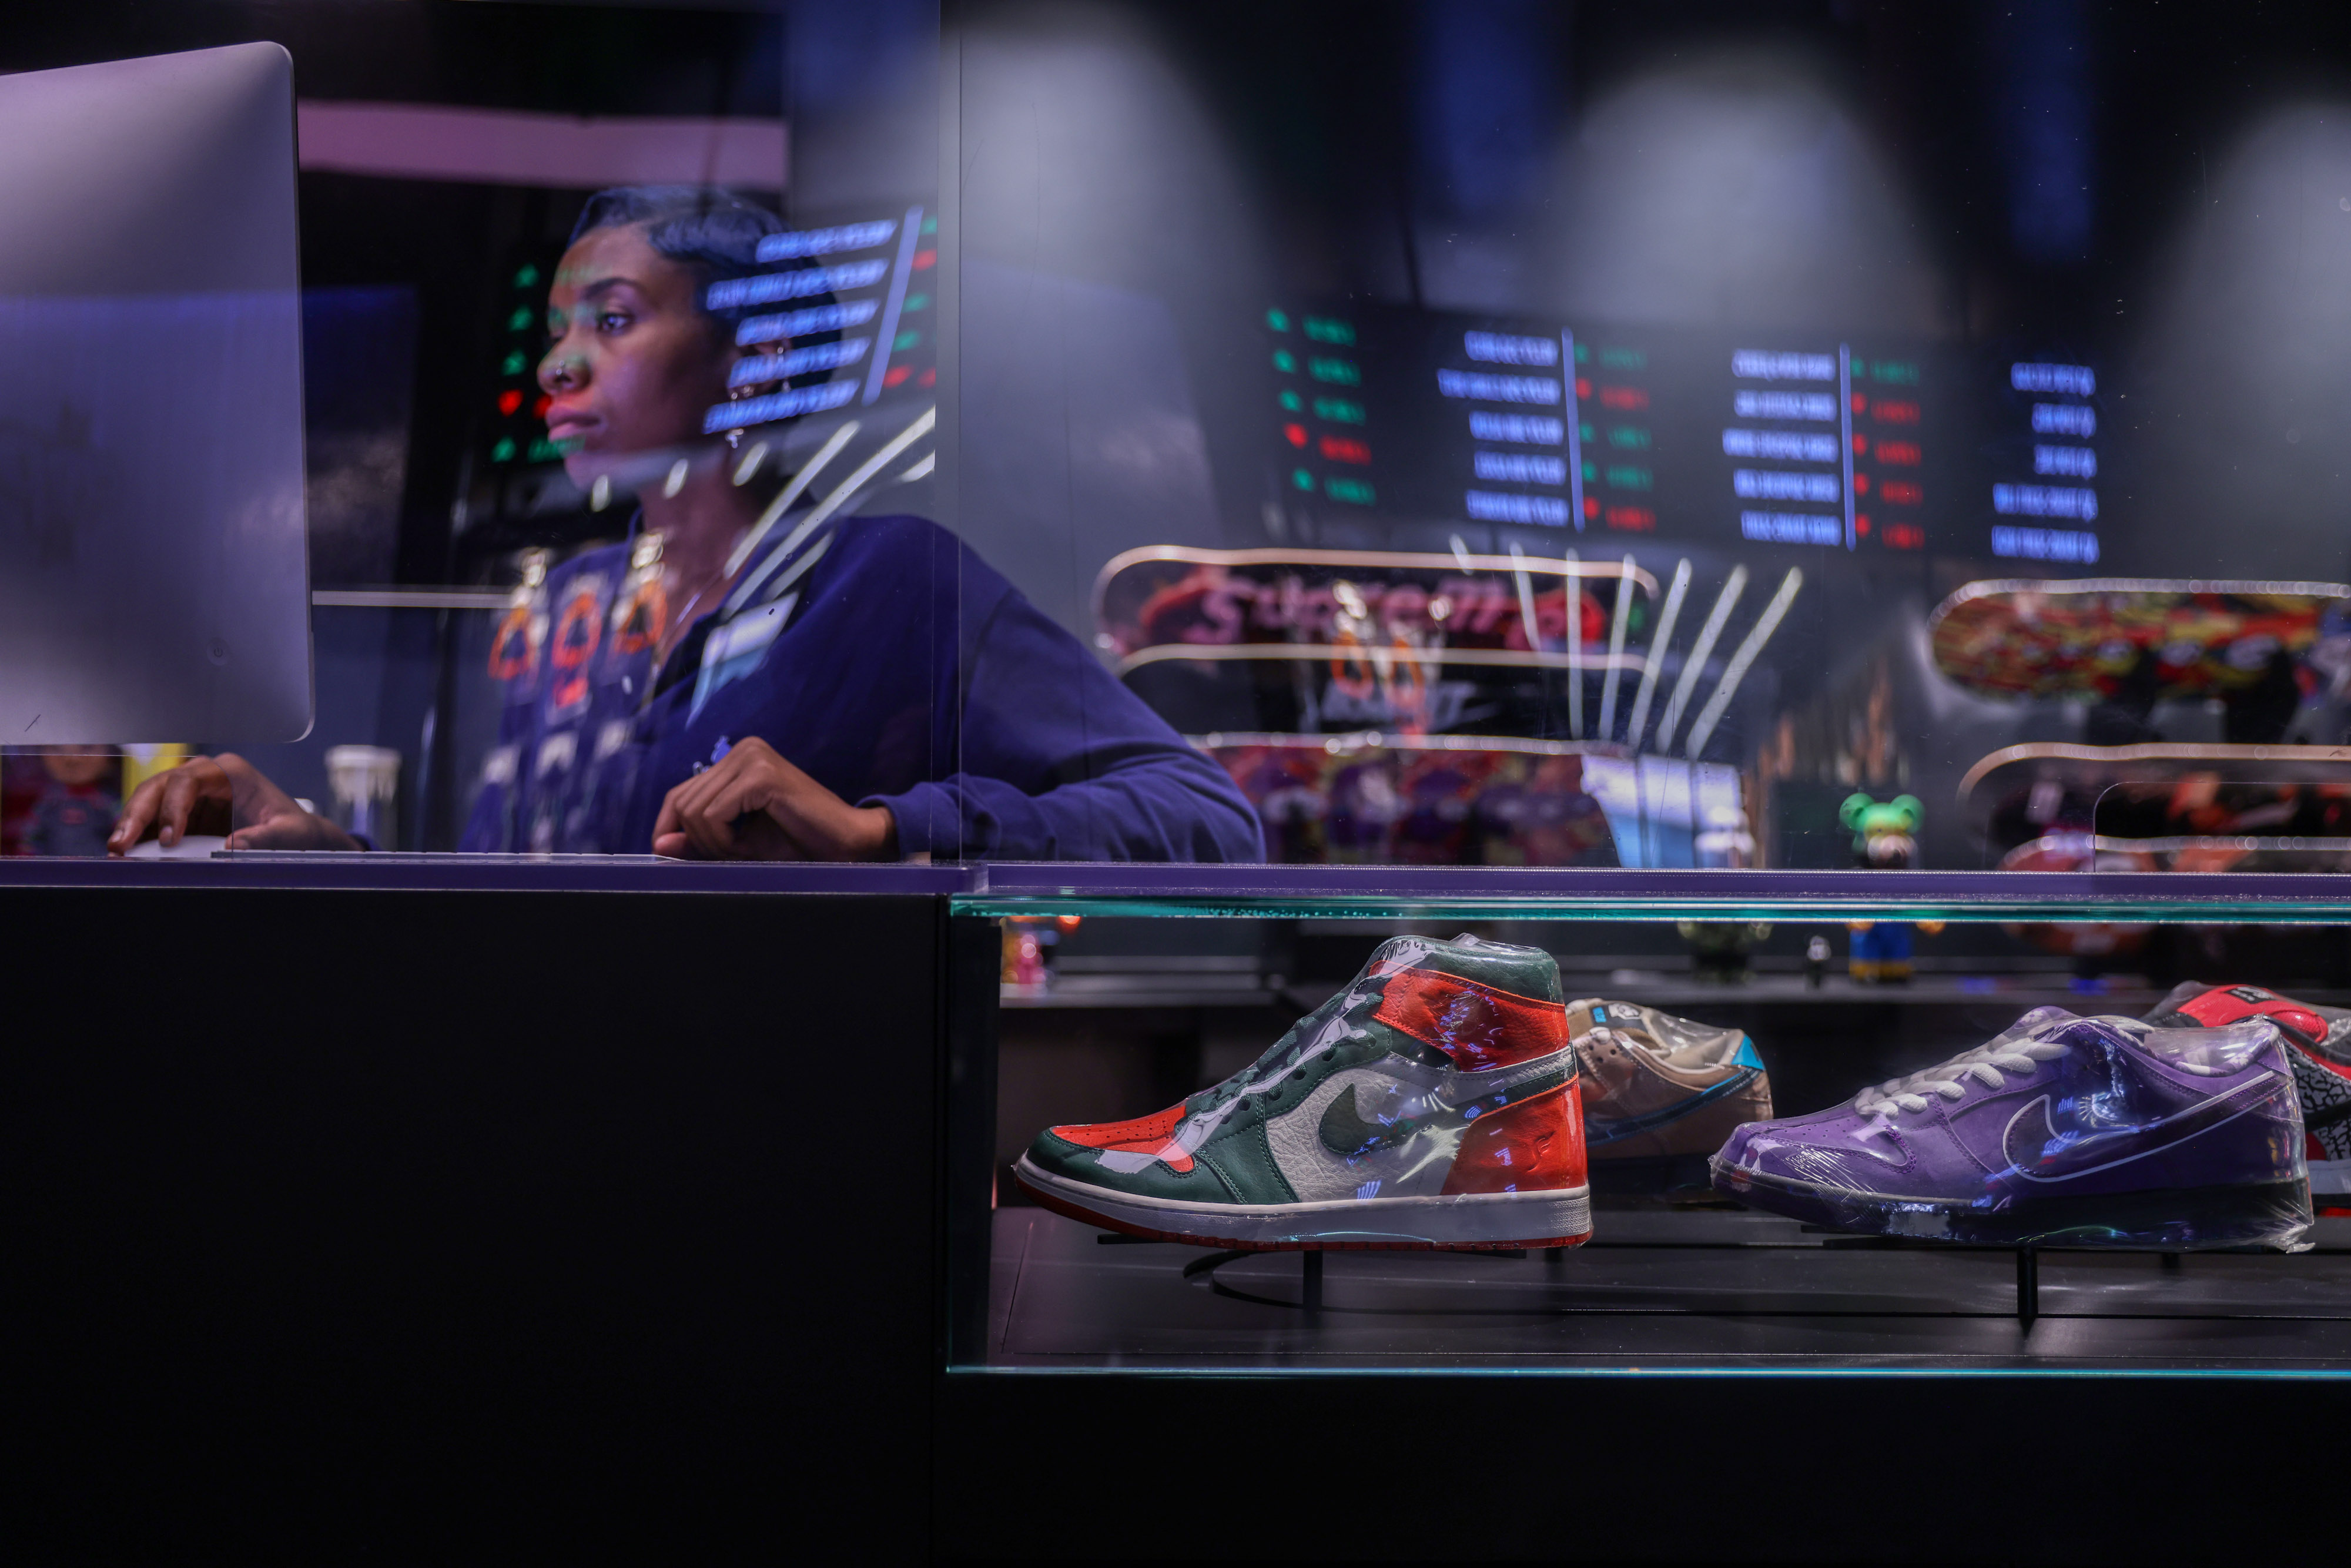 Supply Chain Latest: Limited-Edition Nikes Are Even Harder to Find Bloomberg